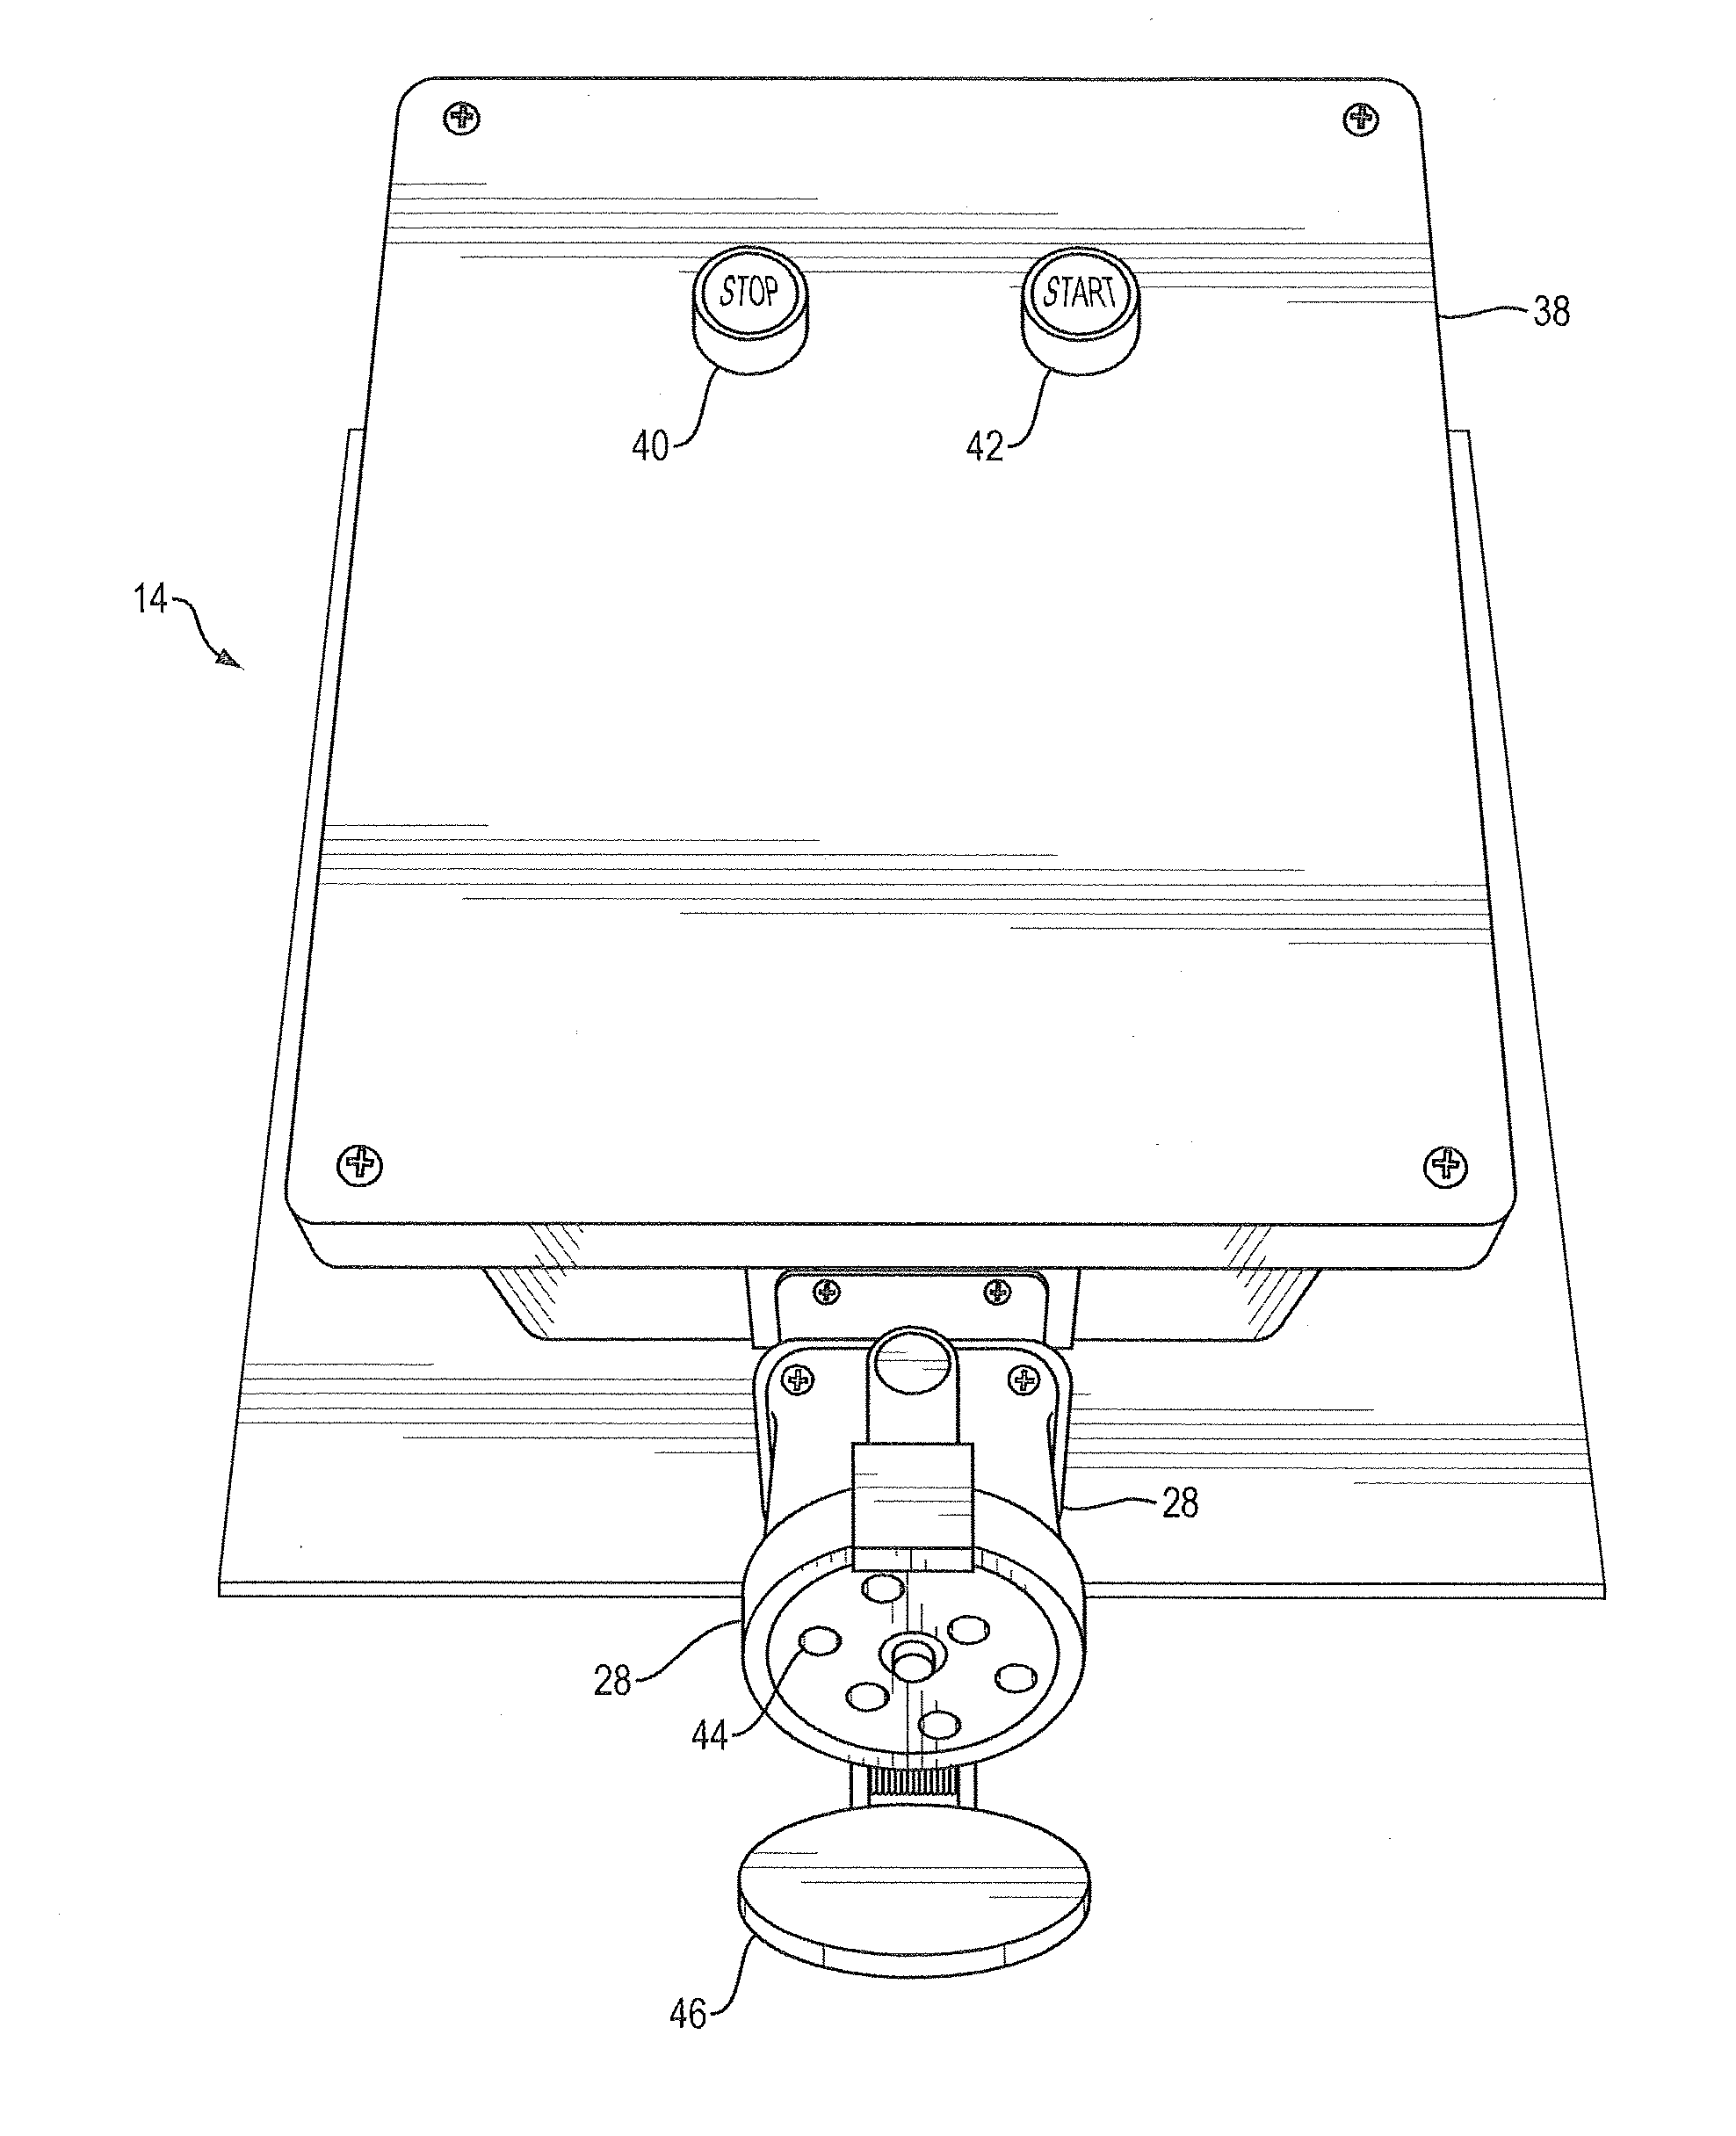 Power supply system including panel with safety release